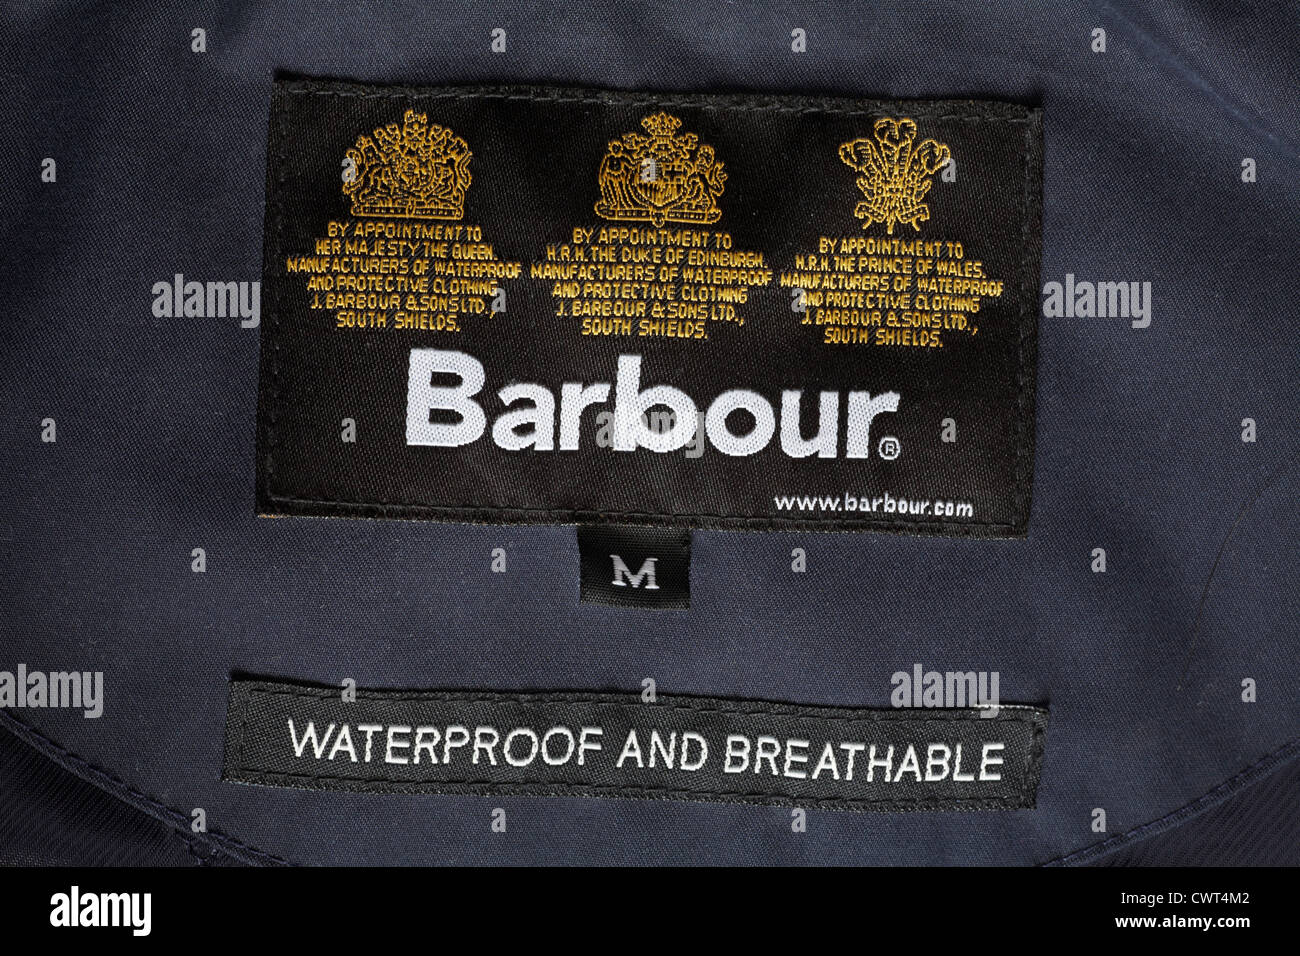 Barbour High Resolution Stock Photography and Images - Alamy